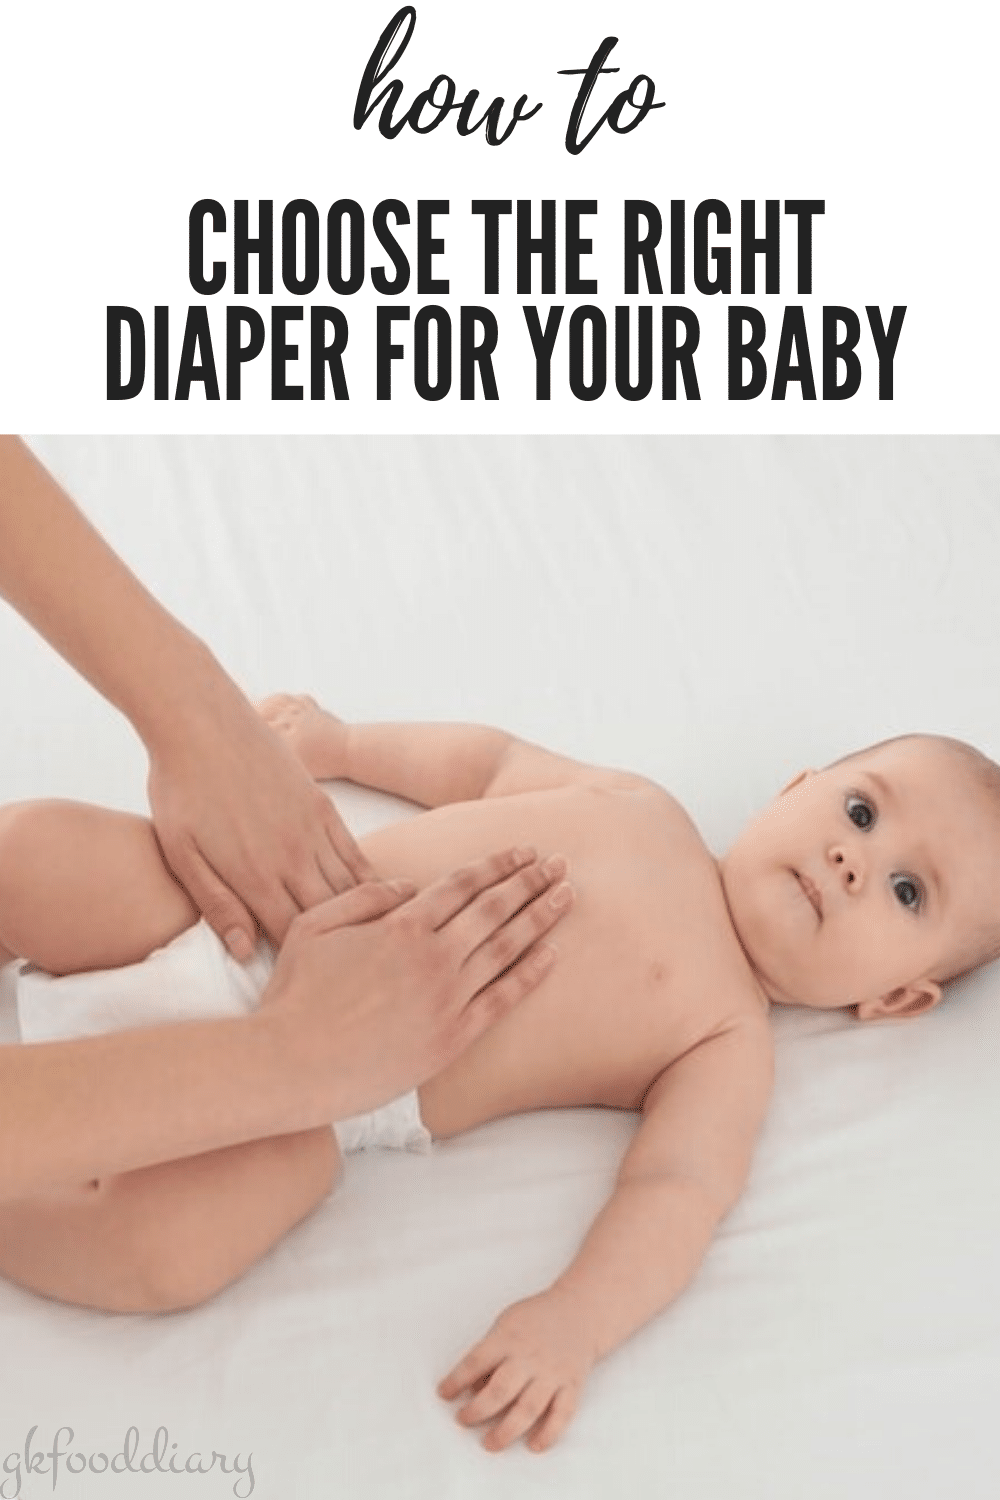 How to Choose the Right Diaper for Your Baby